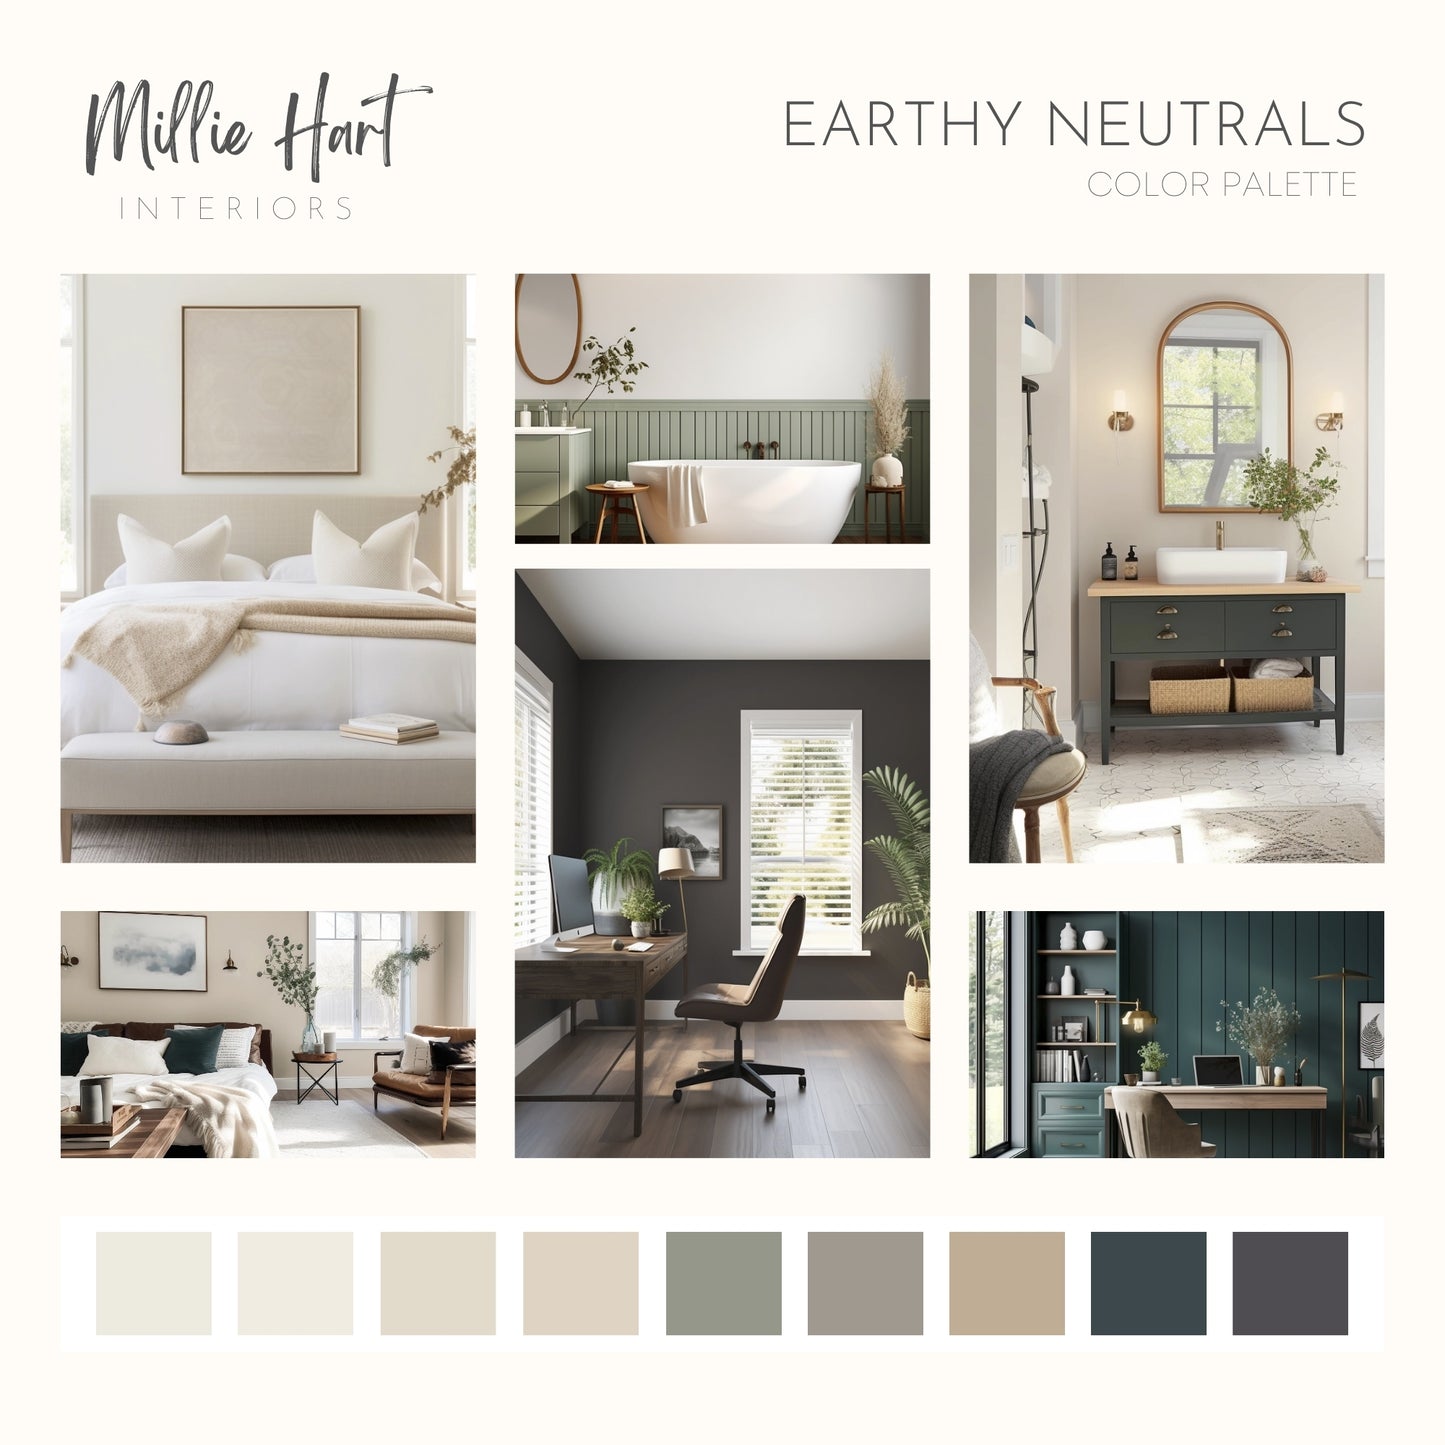 Earthy Neutrals Sherwin Williams Paint Palette, Interior Paint Colors for Home, Modern Neutrals, Warm and Cozy, Natural Linen